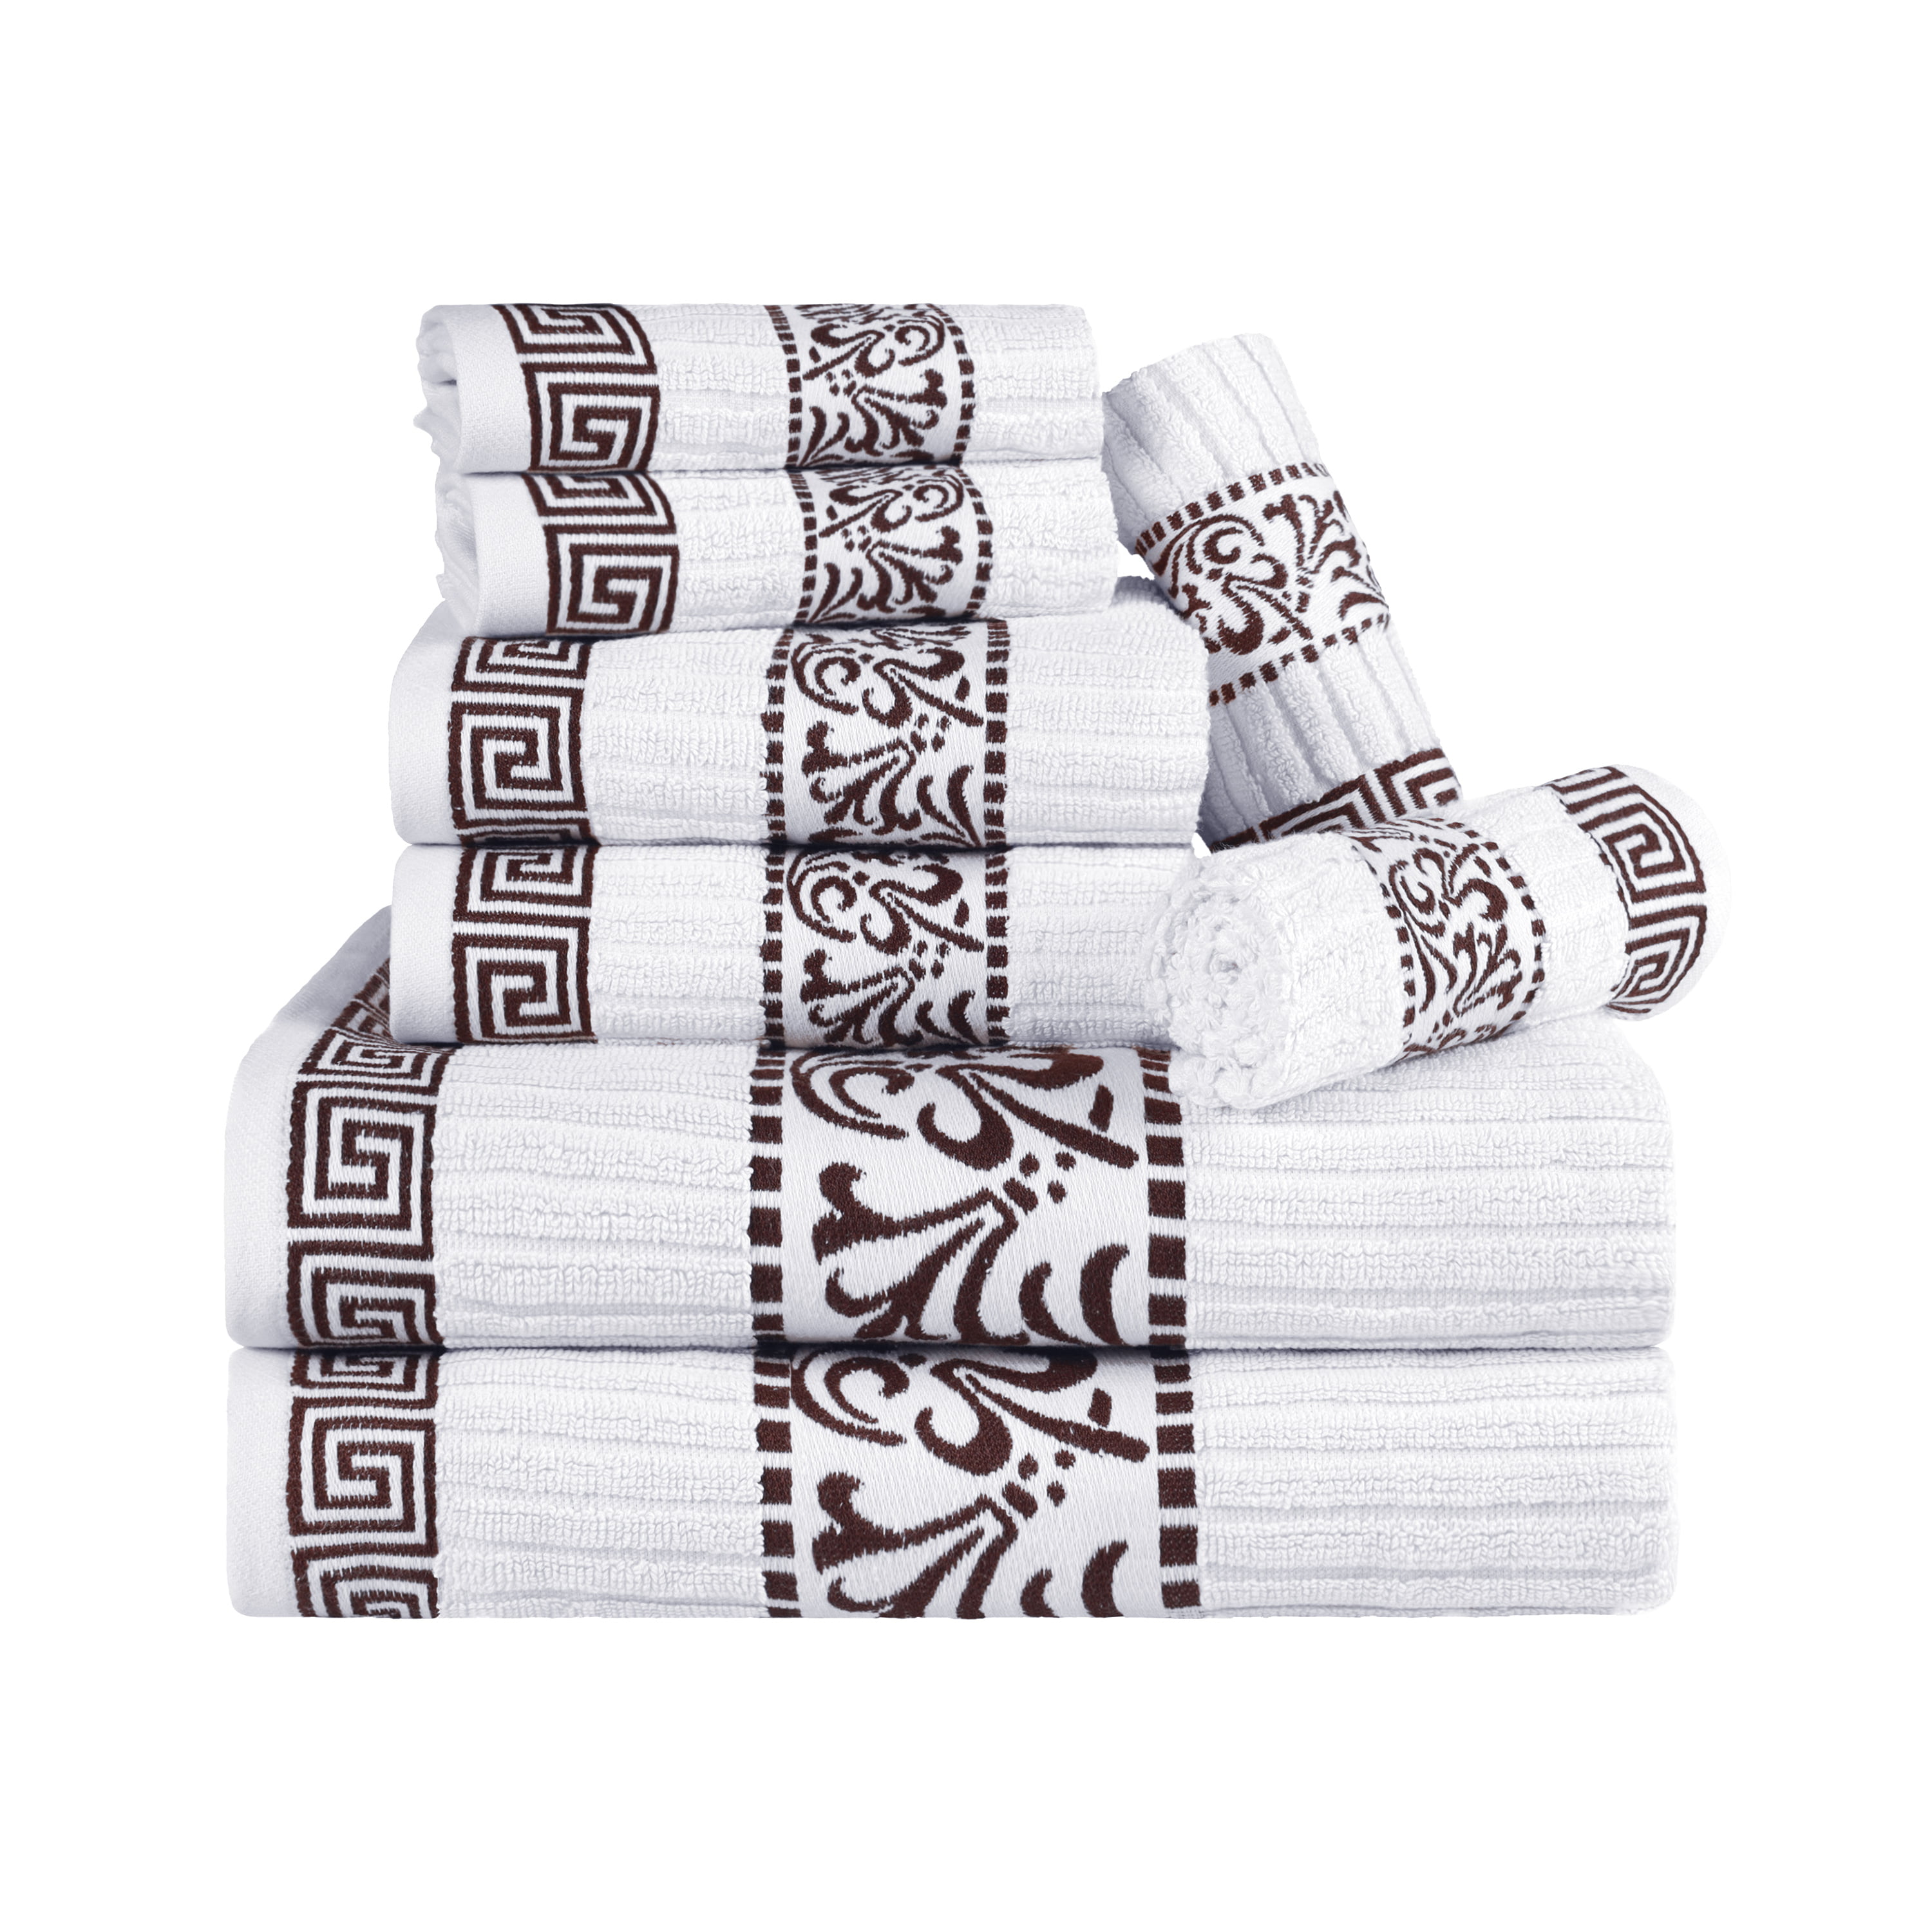 Lizling Luxury Bath Towels Set 3 Pack, Towel Set 100% Cotton (1 Large Bath  Towel, 1 Hand Towel, 1 Washcloth) Ultra Soft and Highly Absorbent, for